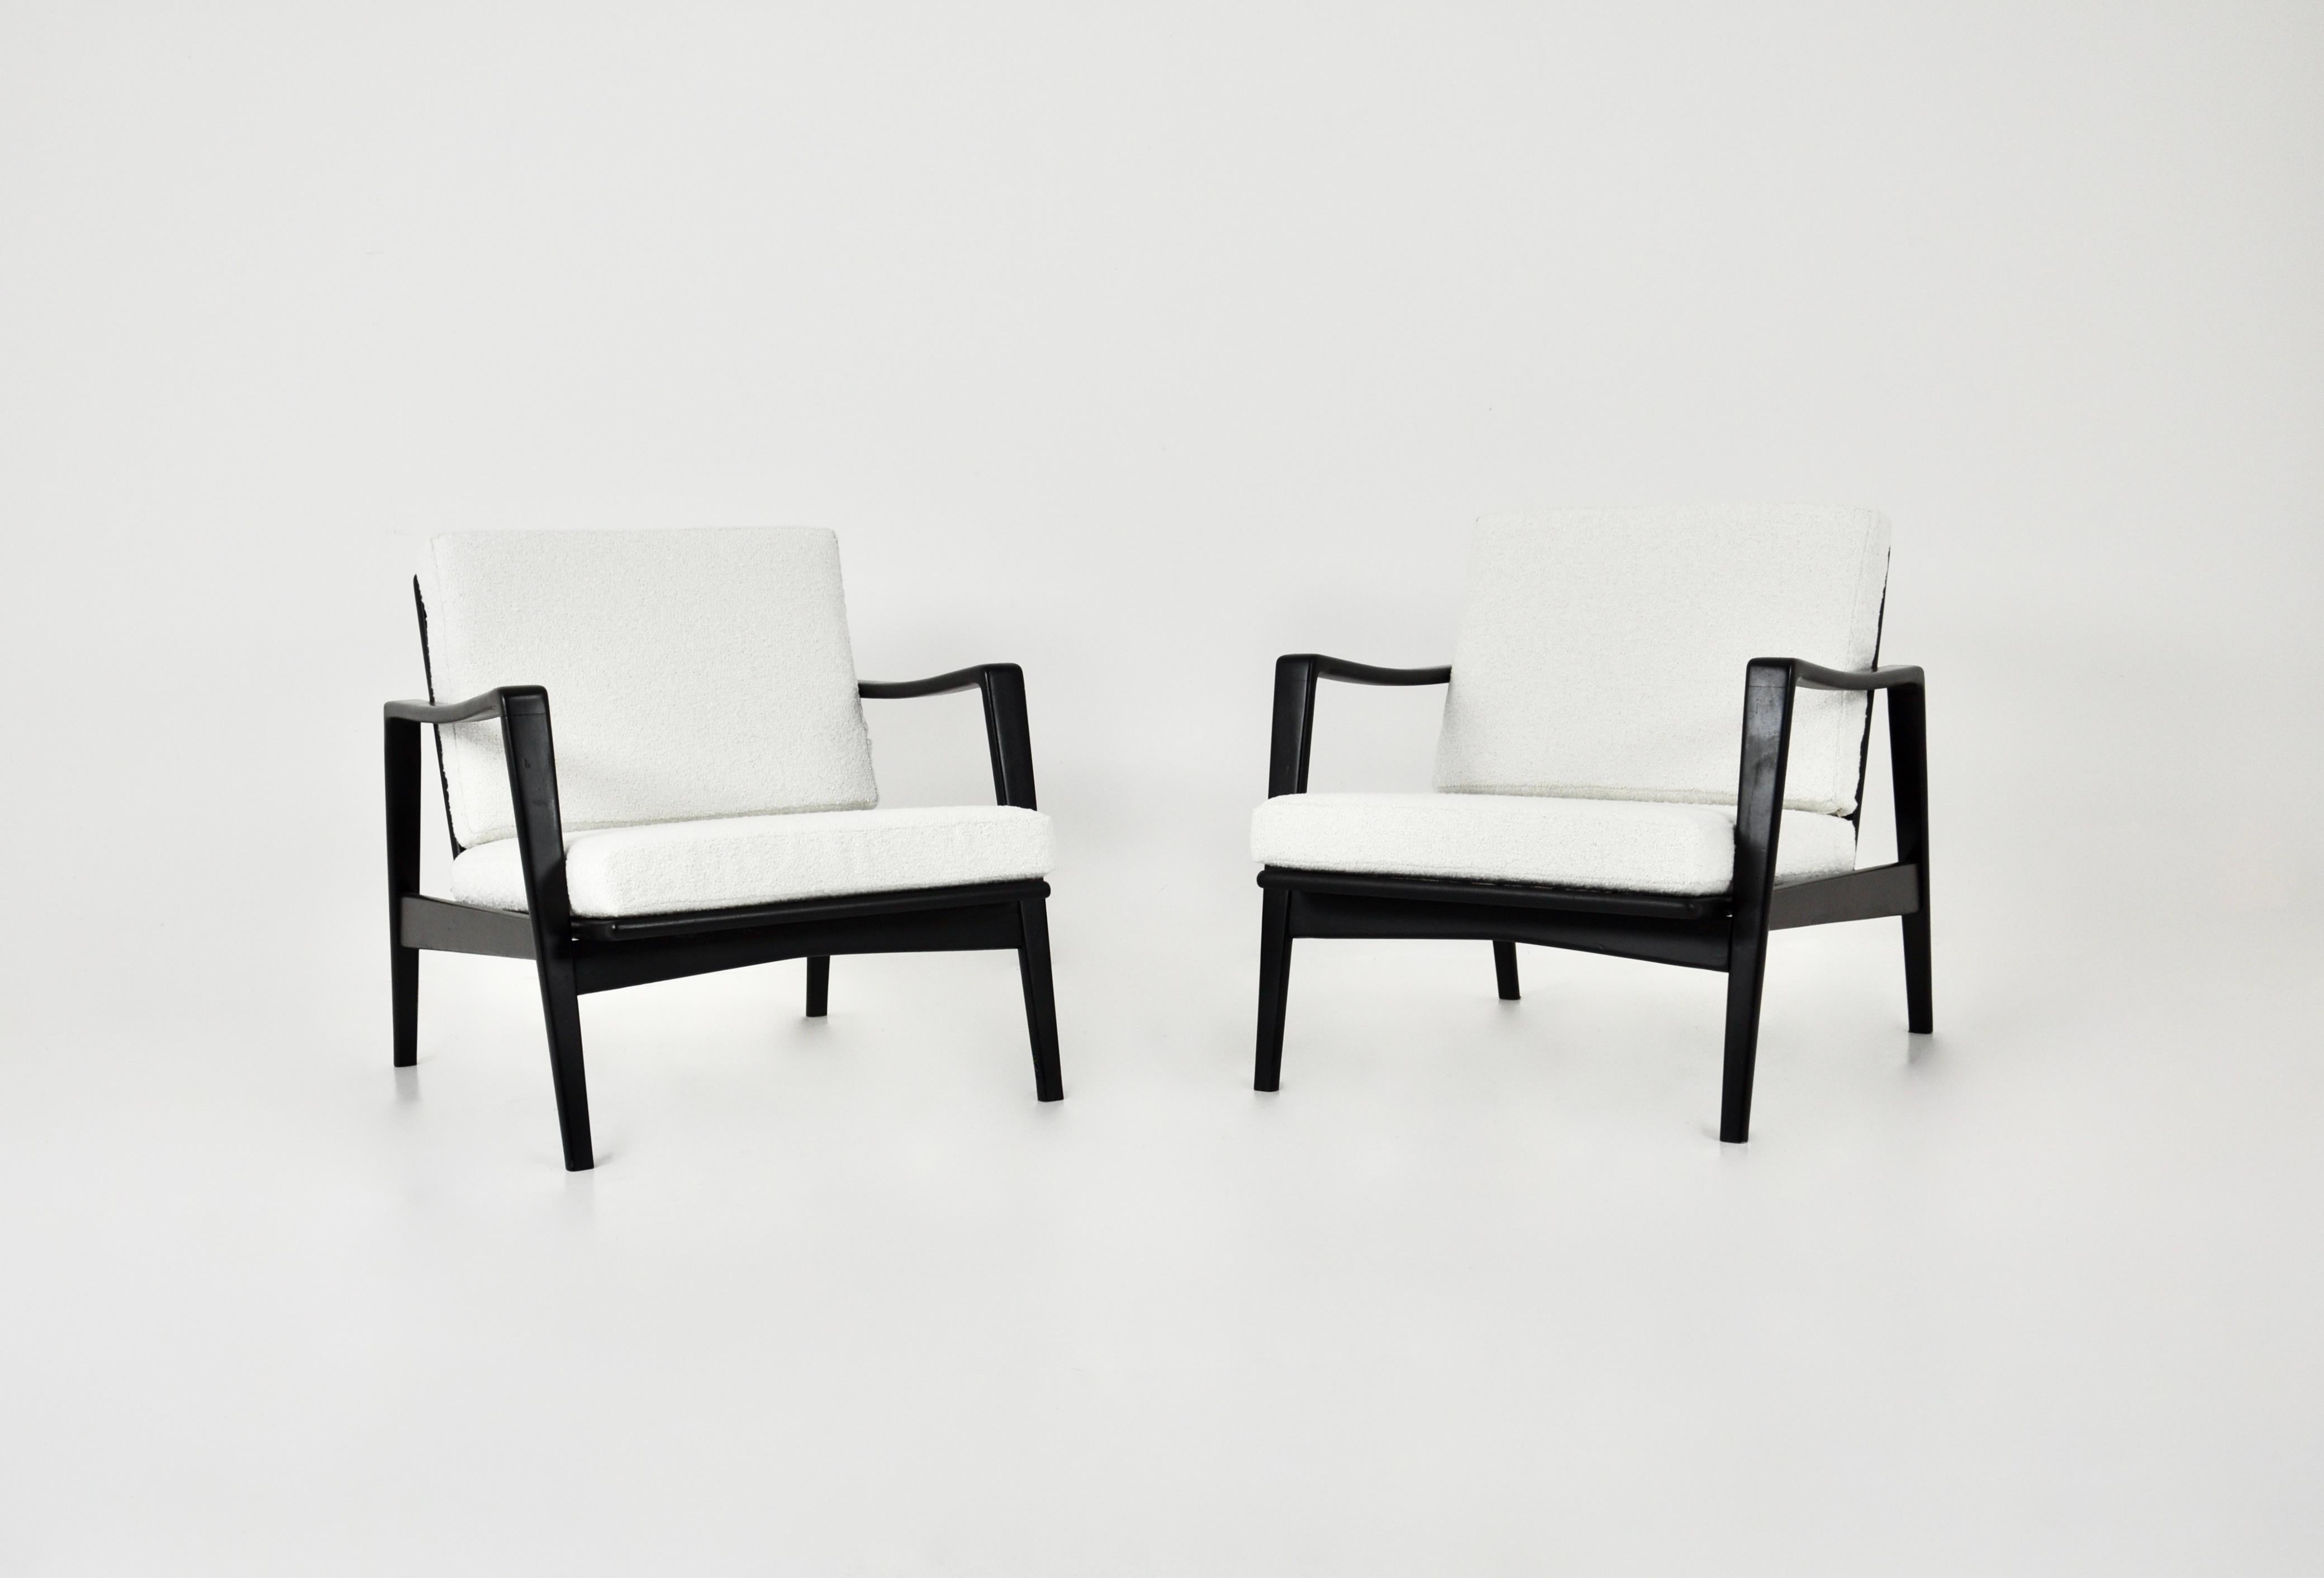 Danish Pair of Scandinavian Lounge Chairs by Arne Wahl Iversen for Komfort, 1950s For Sale